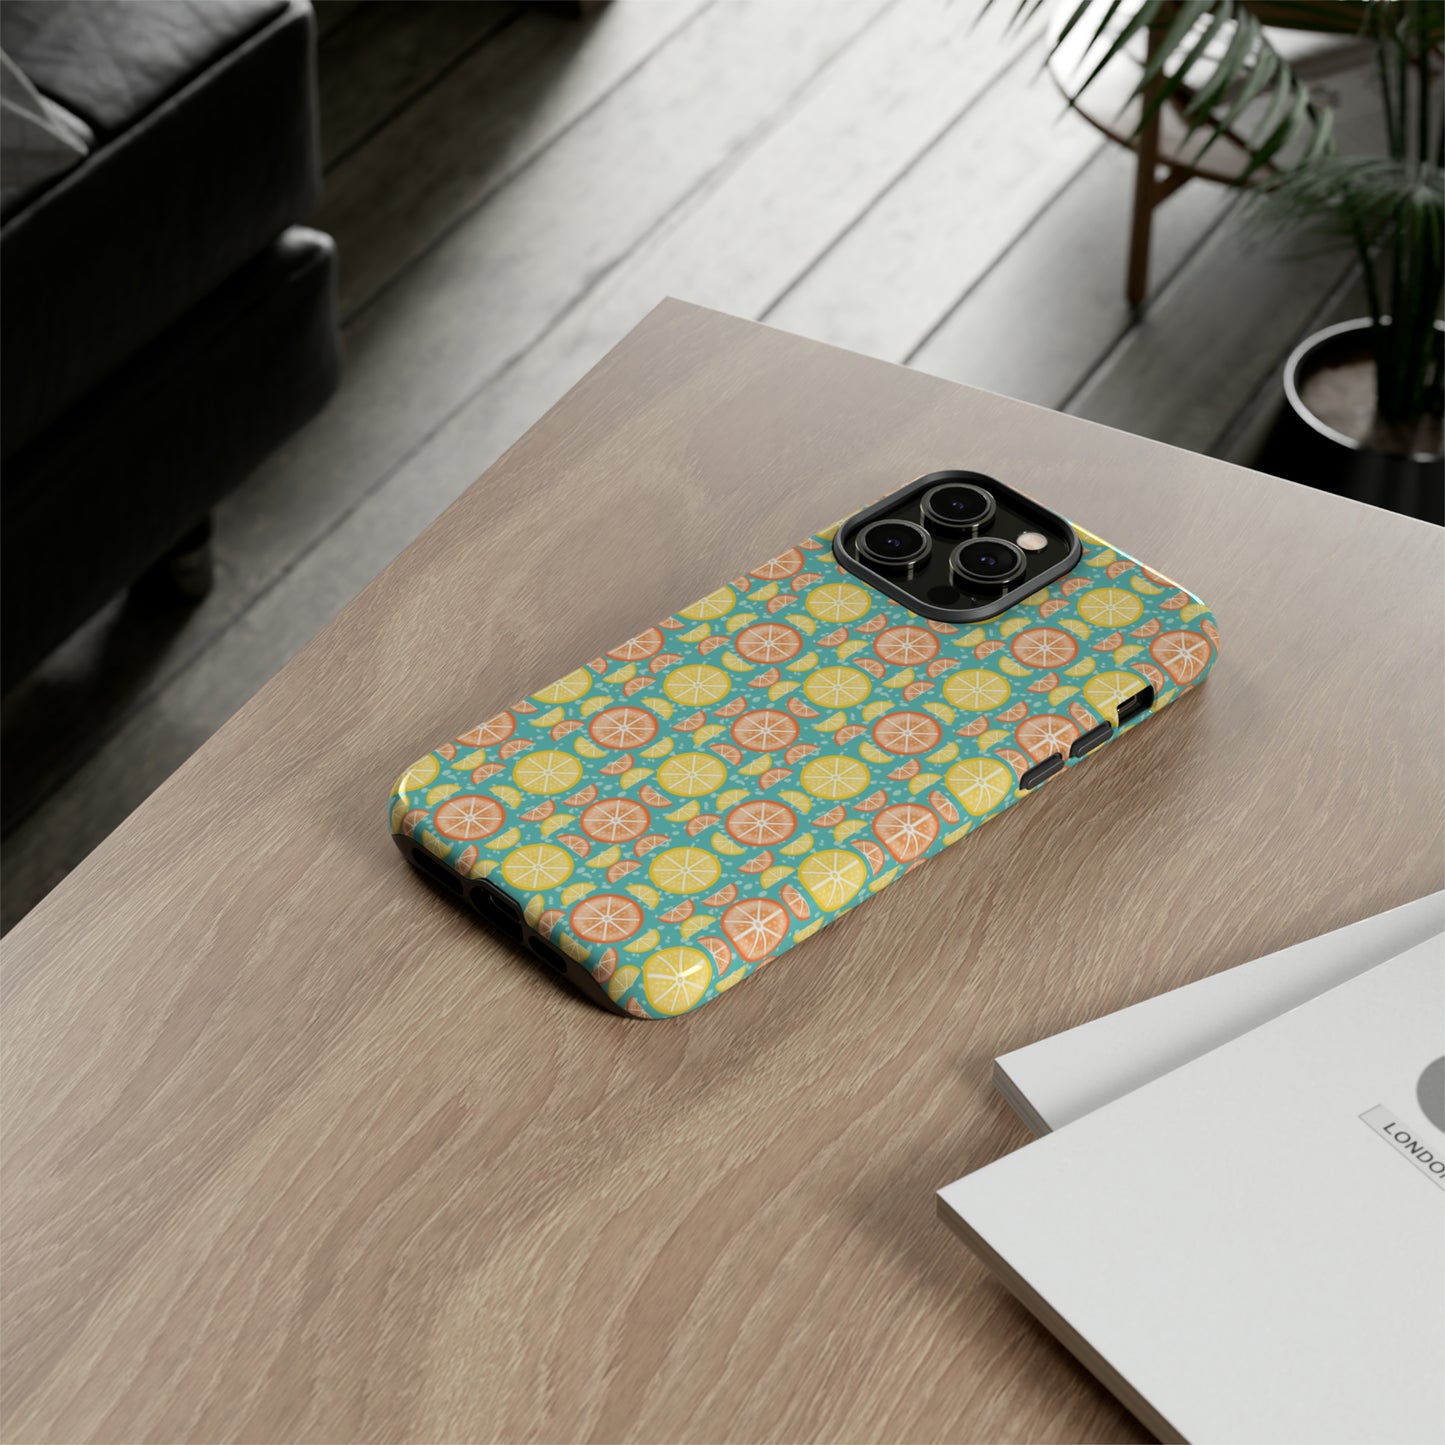 Citrus Slices Tough Phone Case - Protect Your Device with Style